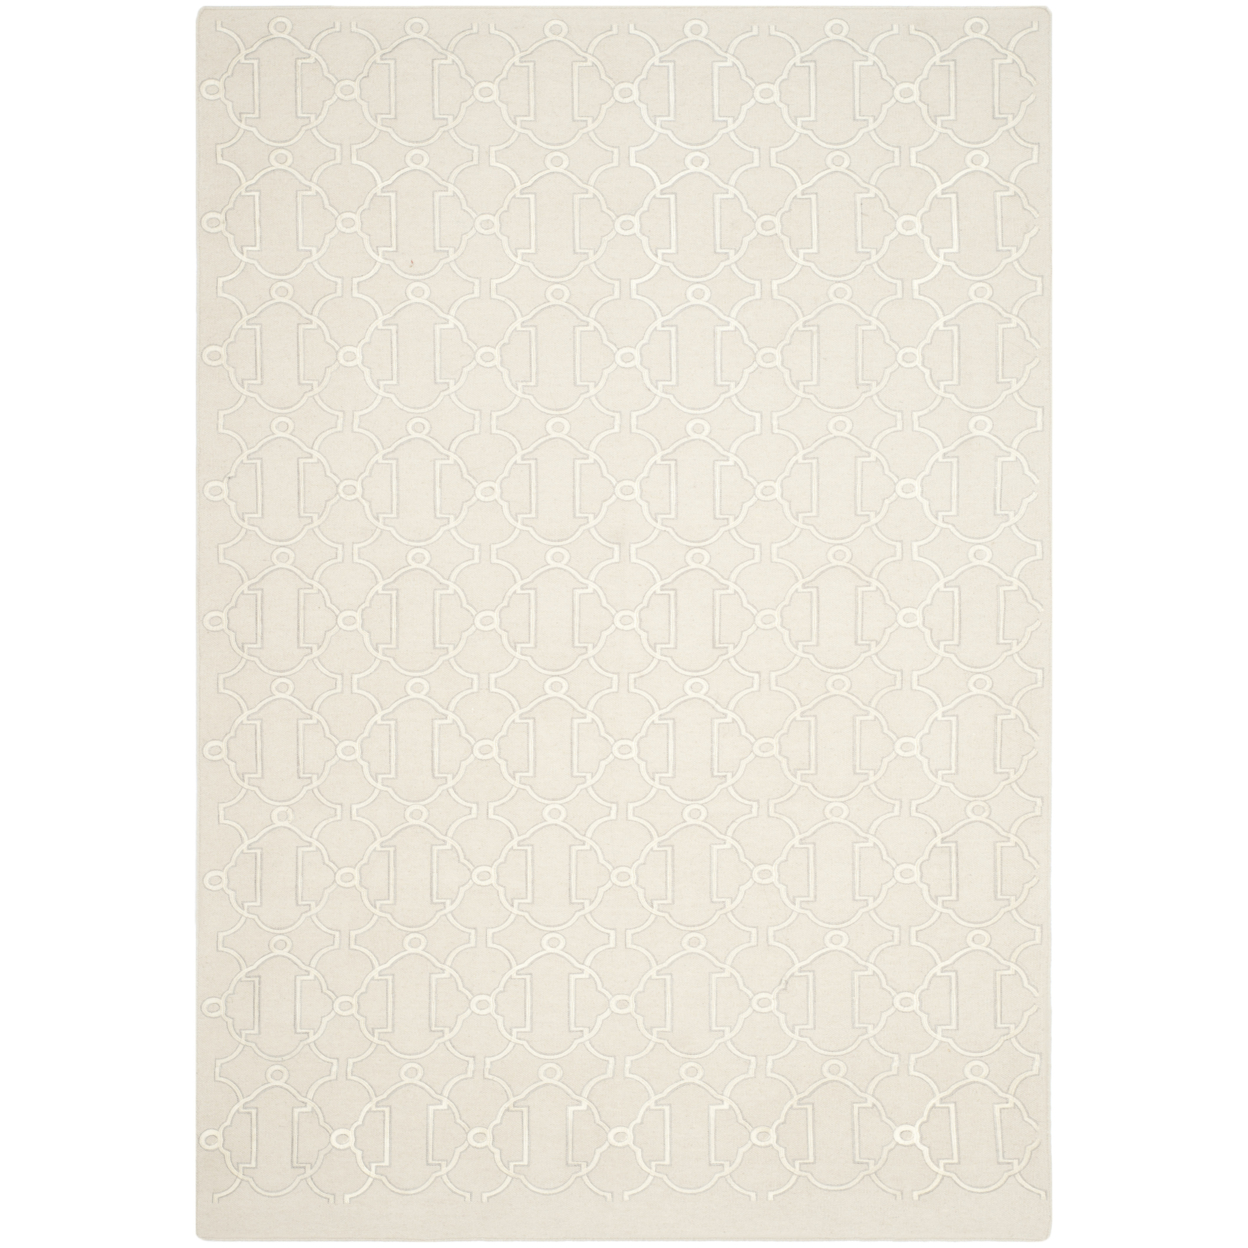 SAFAVIEH Dhurries Collection DHU643A Handwoven Beige Rug - 6' X 9'